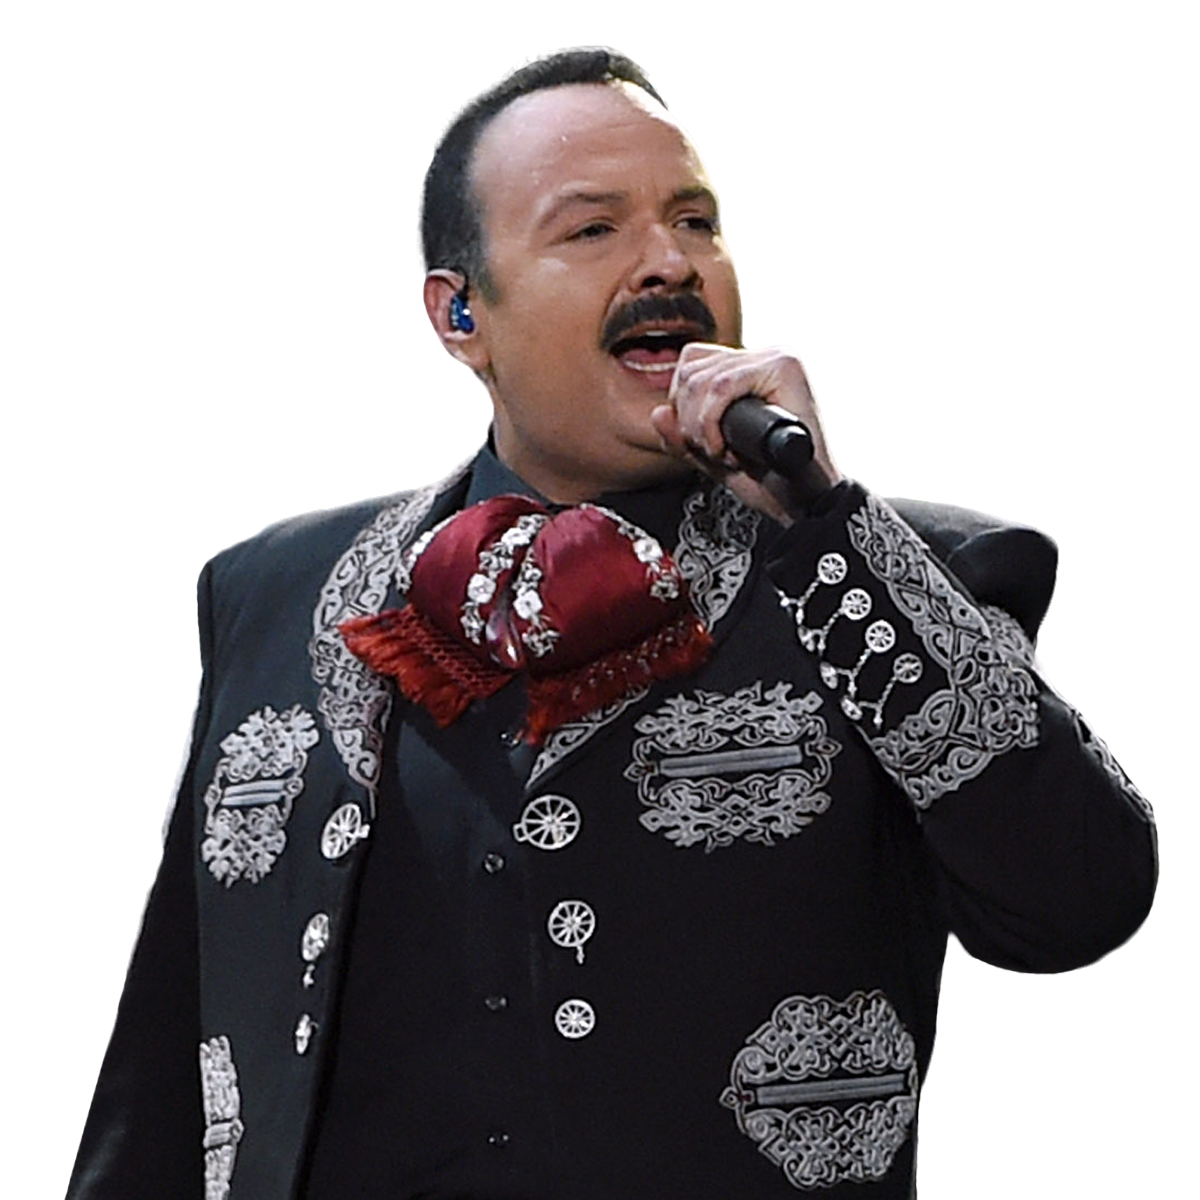 Contents1 Who’s Pepe Aguilar?2 Pepe Aguilar’s Historica...